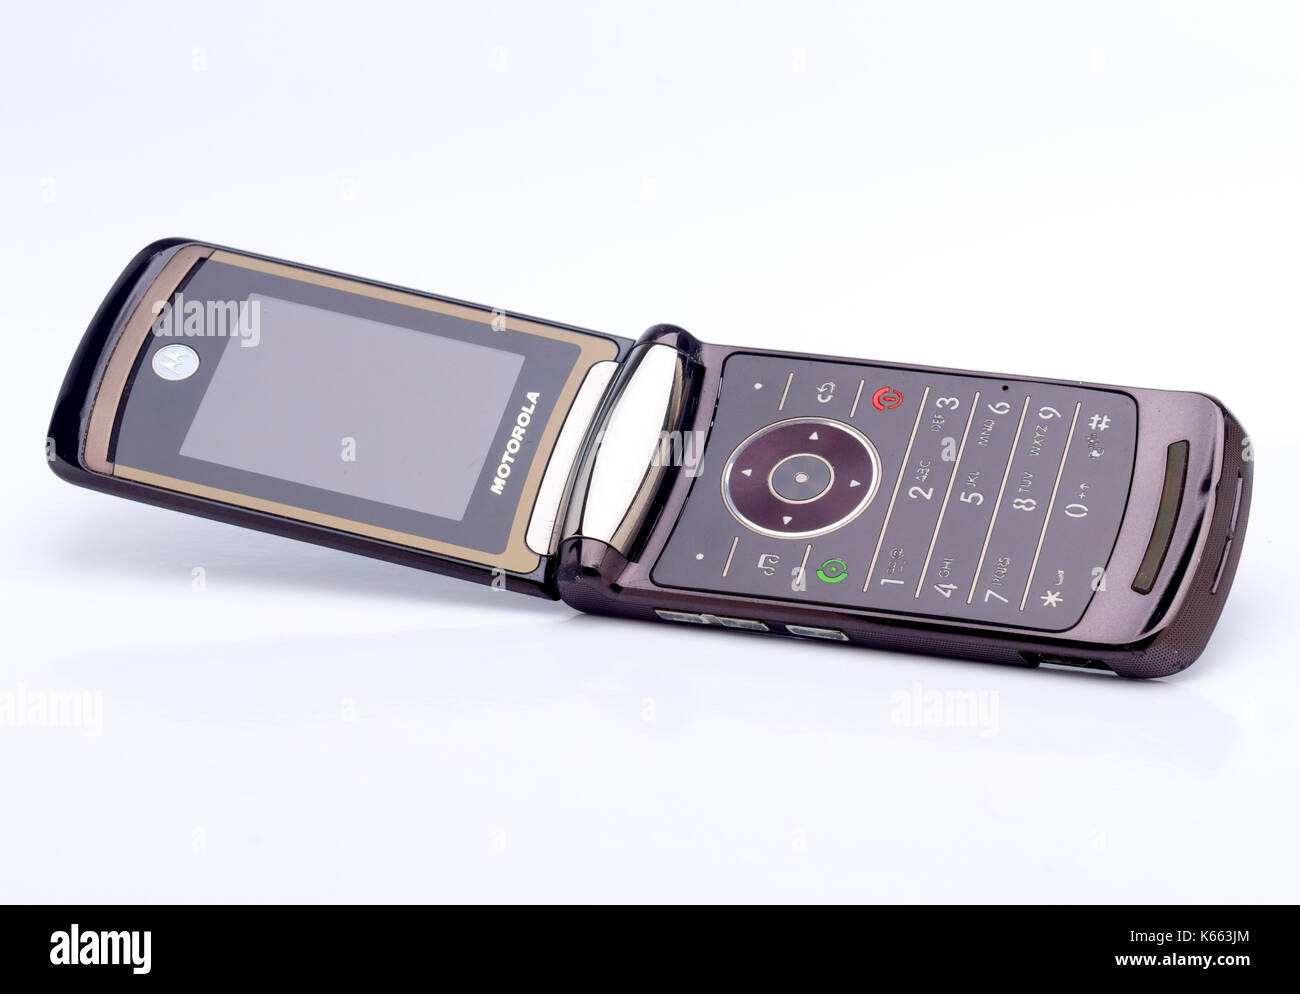 Motorola Razr 2 V9 First introduced in 2007, Motorola is an American company founded in 1928 Stock Photo